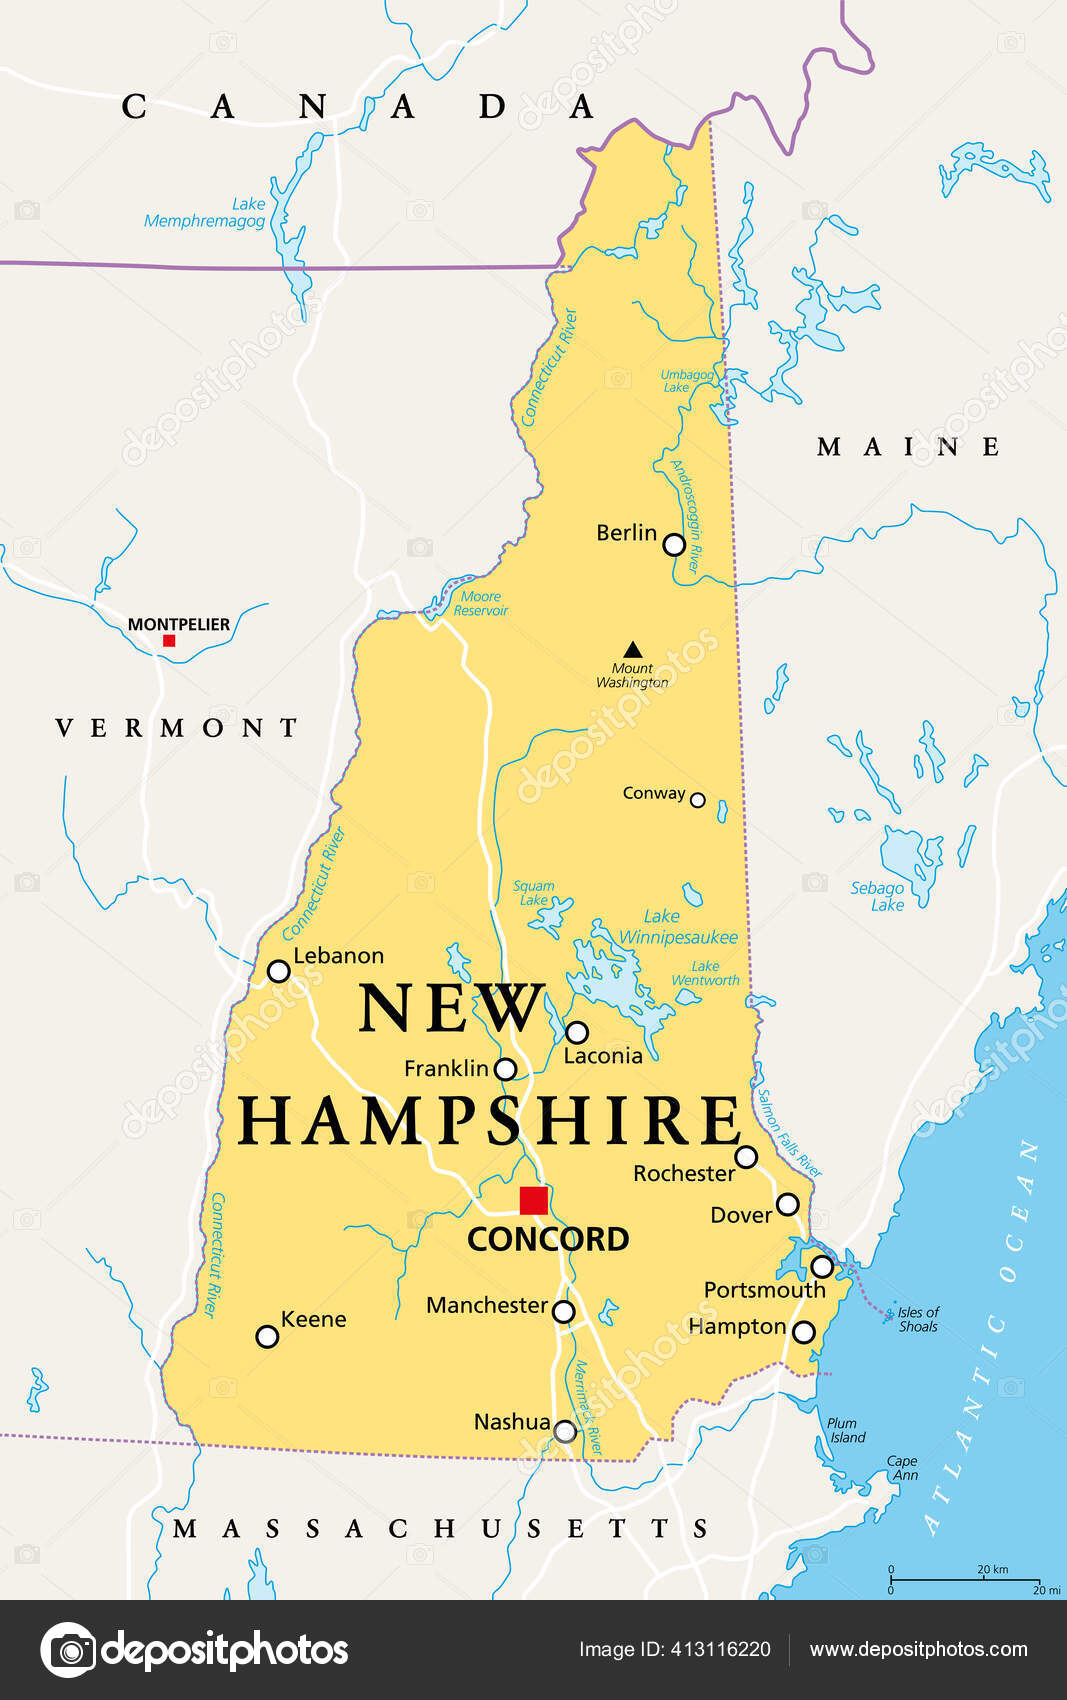 New Hampshire Political Map Capital Concord State New England Region Vector Image By C Furian Vector Stock